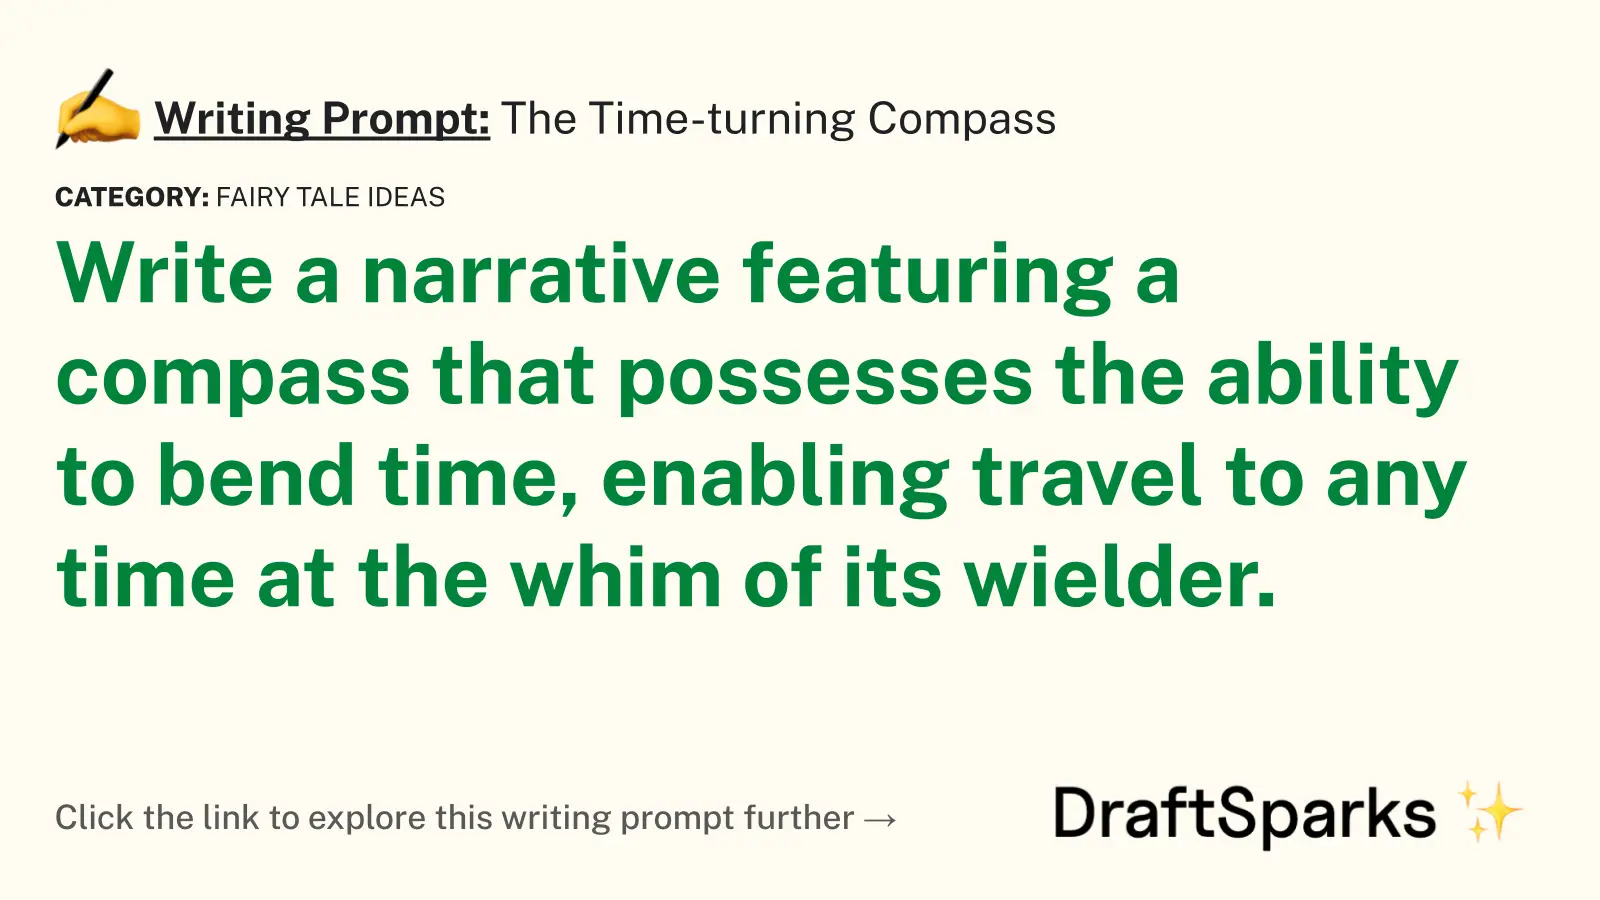 The Time-turning Compass